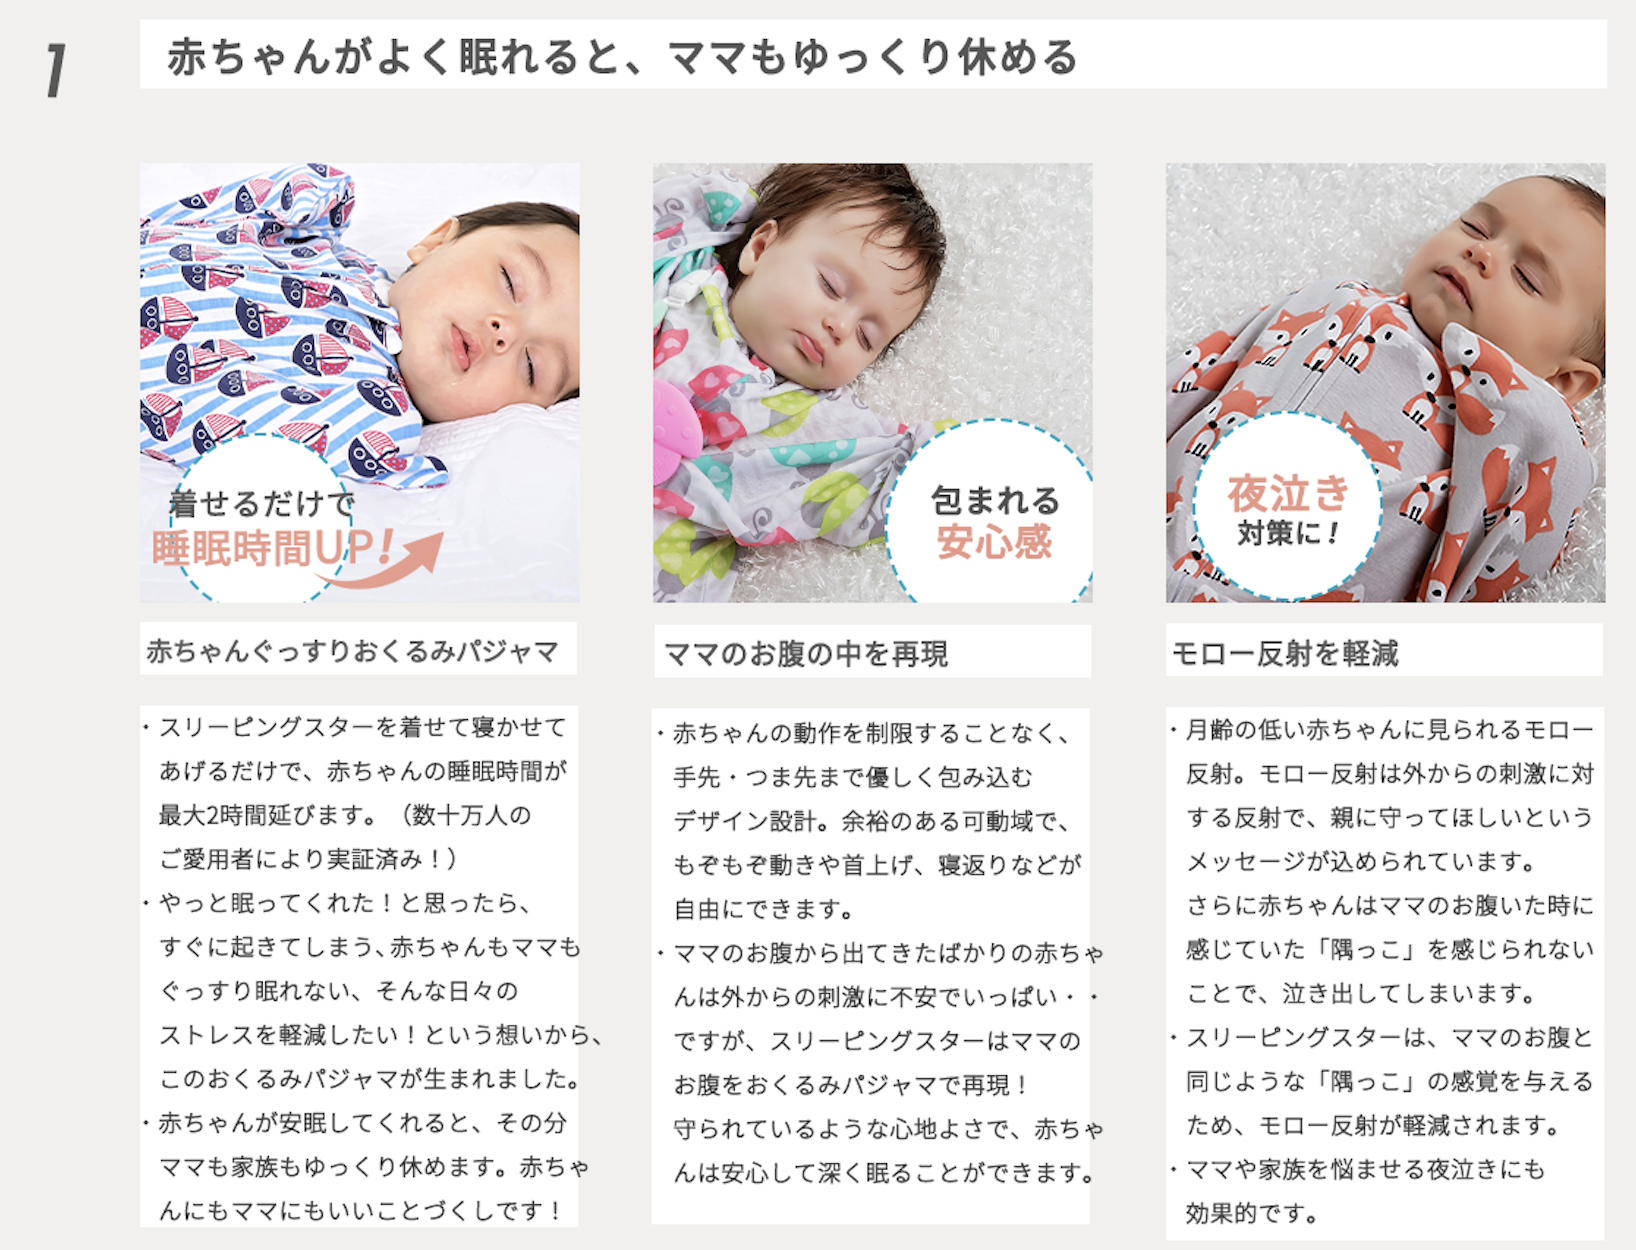 Humble Bunny case study for Sleeping Baby Japan e-commerce Amazon A+ content